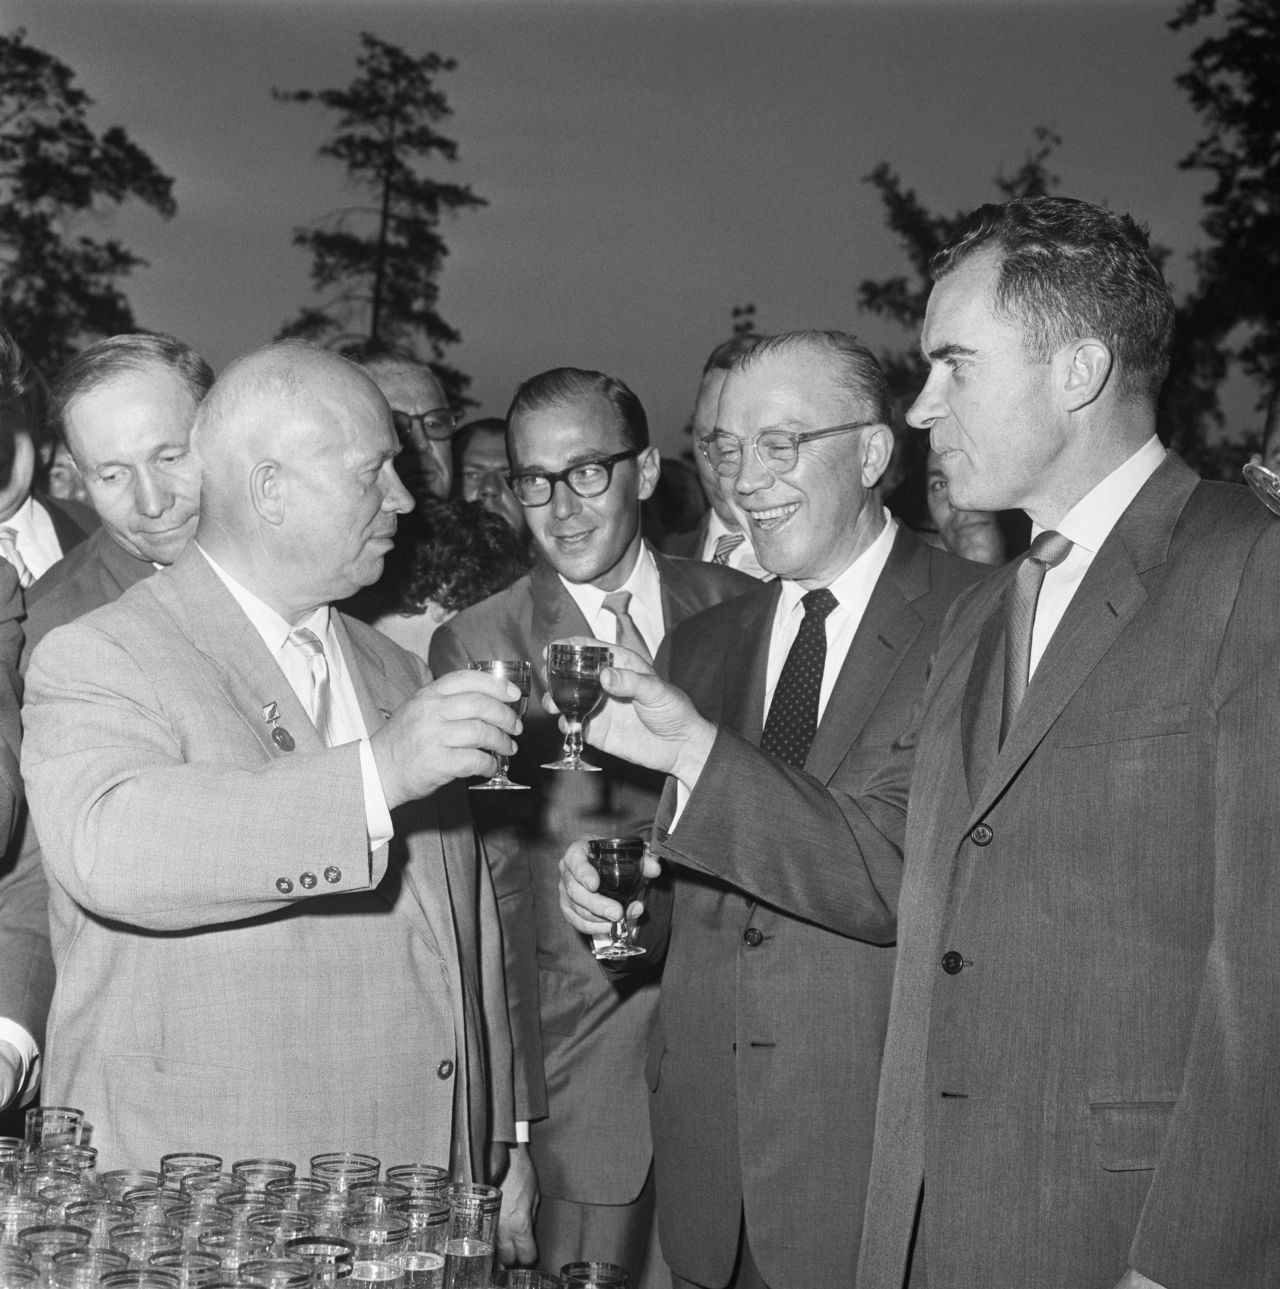 Soviet leader Nikita Khrushchev, left, shares a toast of Pepsi with US Vice President Richard Nixon, right, and President Eisenhower's brother Milton, second from right, who were visiting Moscow as part of a cultural exchange in 1959. It was at the opening of the American National Exhibition, where Khrushchev and Nixon argued over the merits of capitalism and communism. This later became known as the "kitchen debate" after the two men continued their back-and-forth in the kitchen of a model American home. Nixon would later become President.